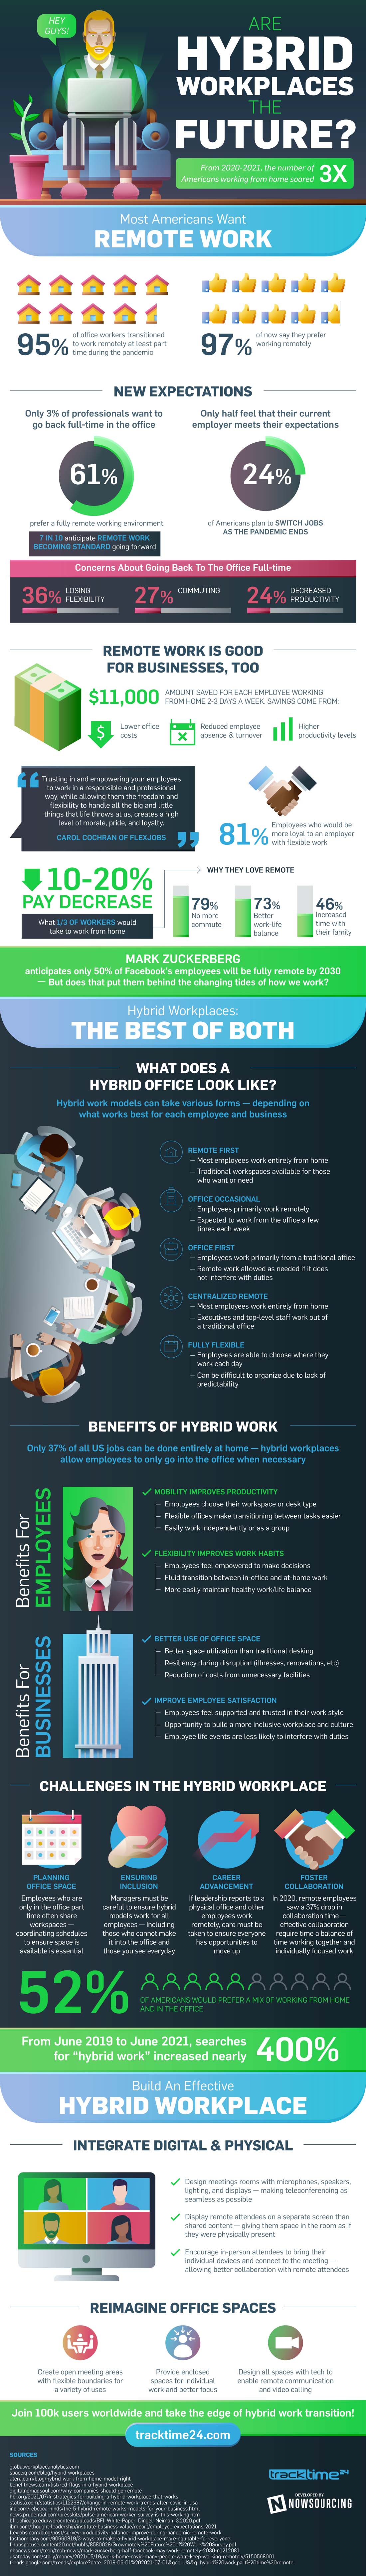 Are Hybrid Workplaces Here to Stay?